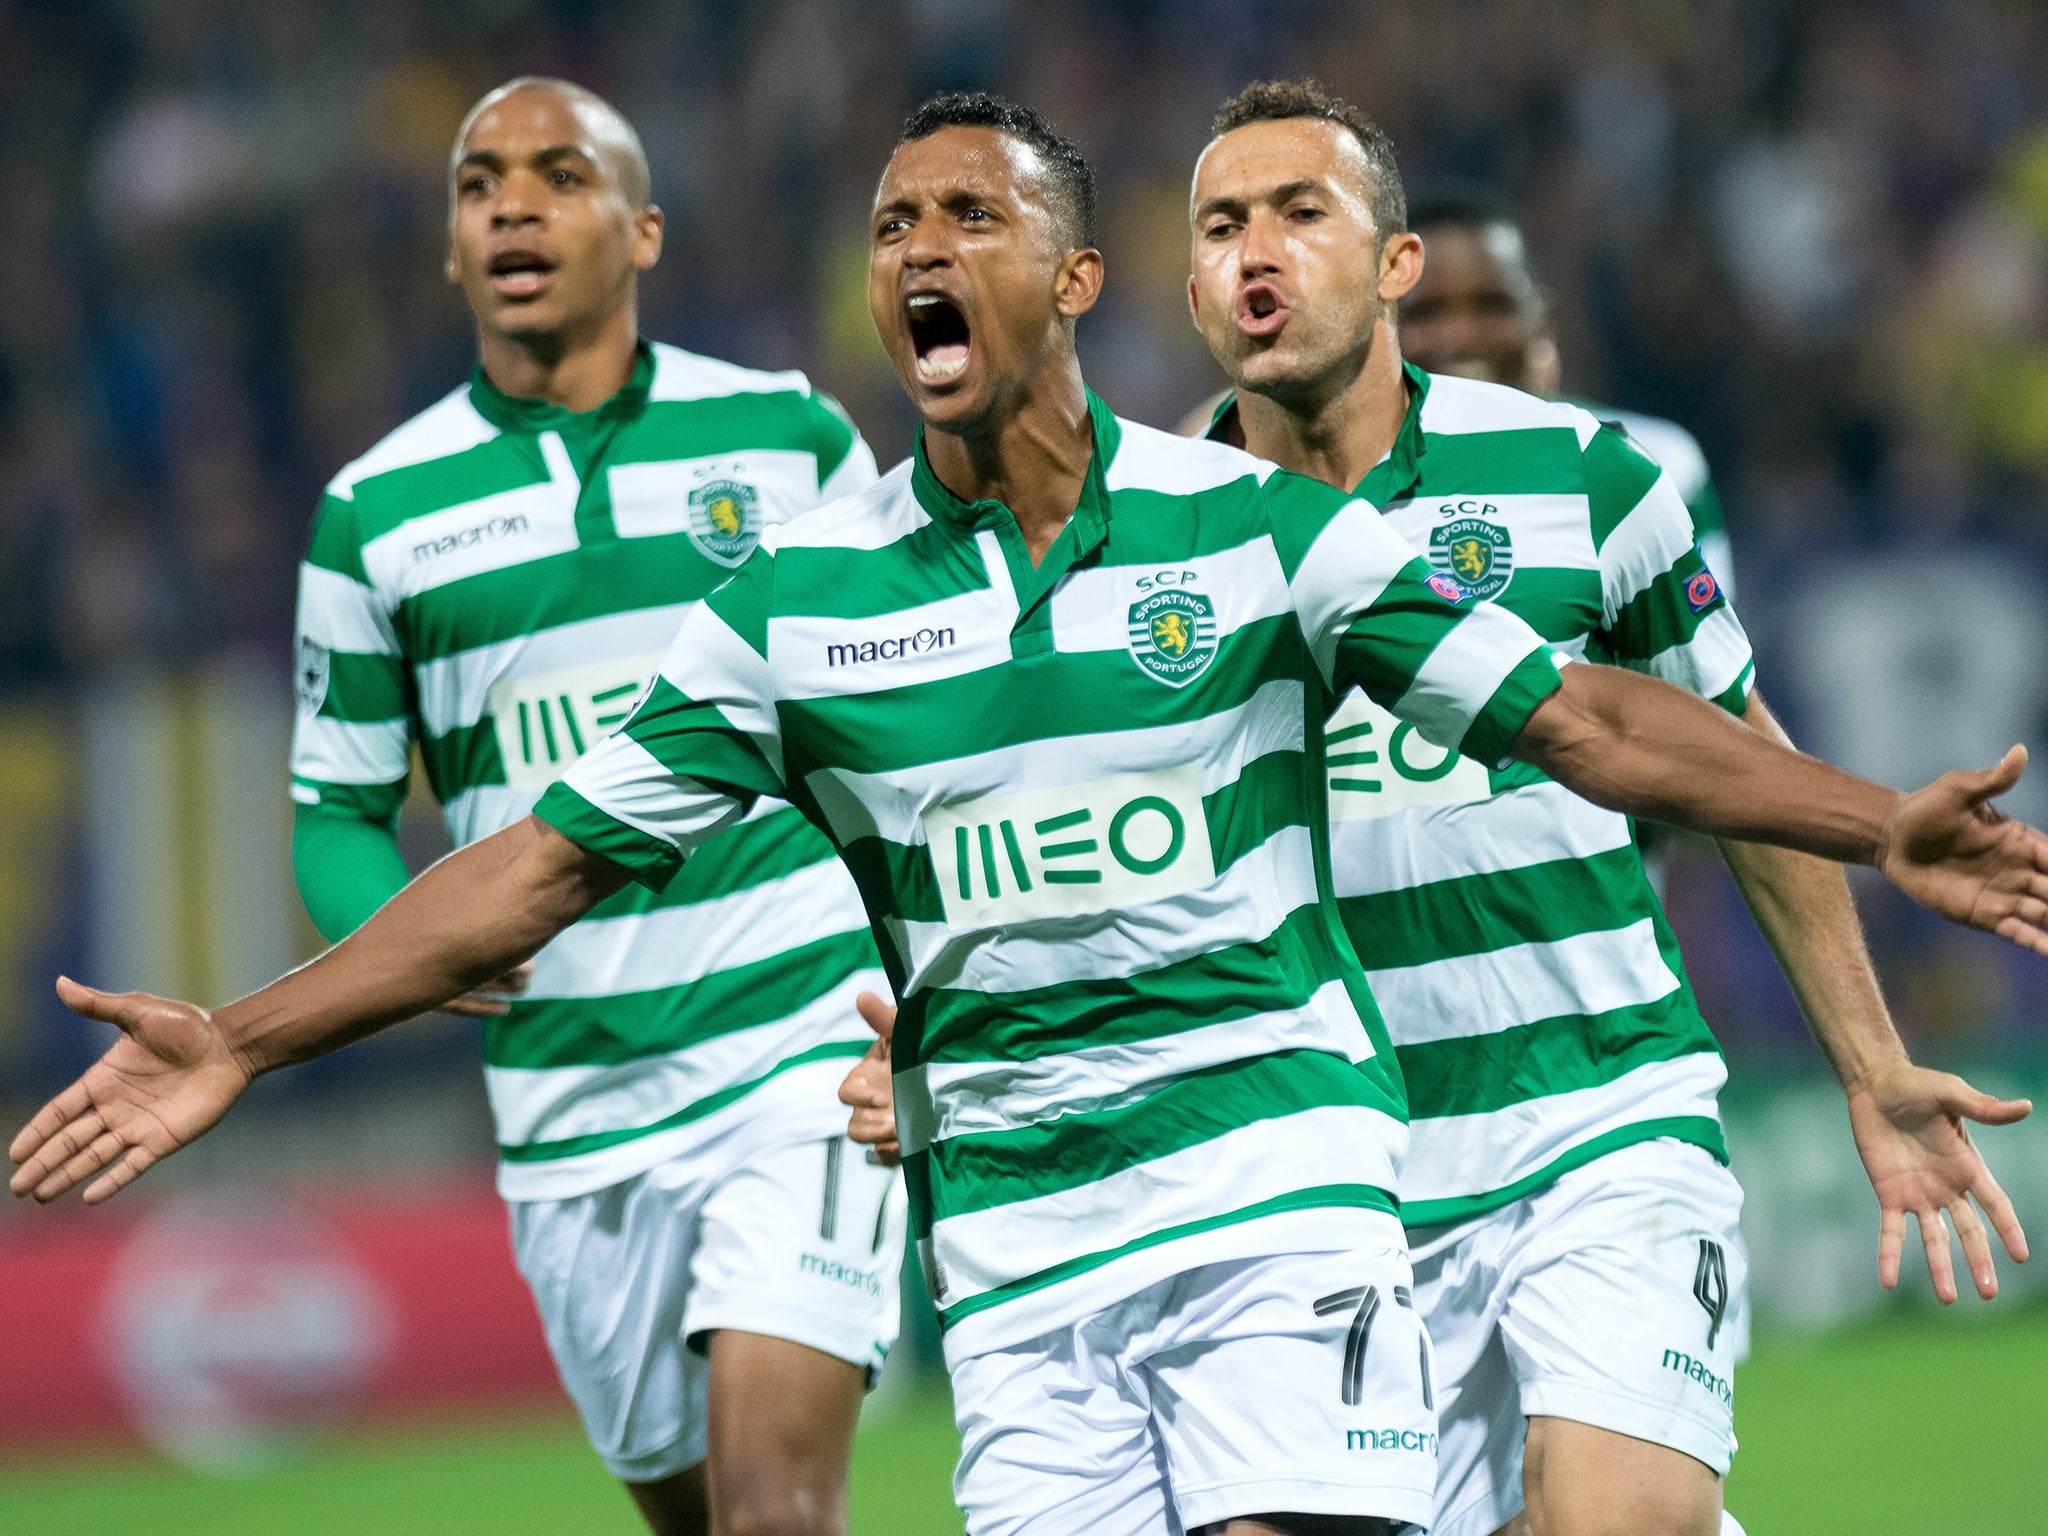 Nani in action for Sporting Lisbon